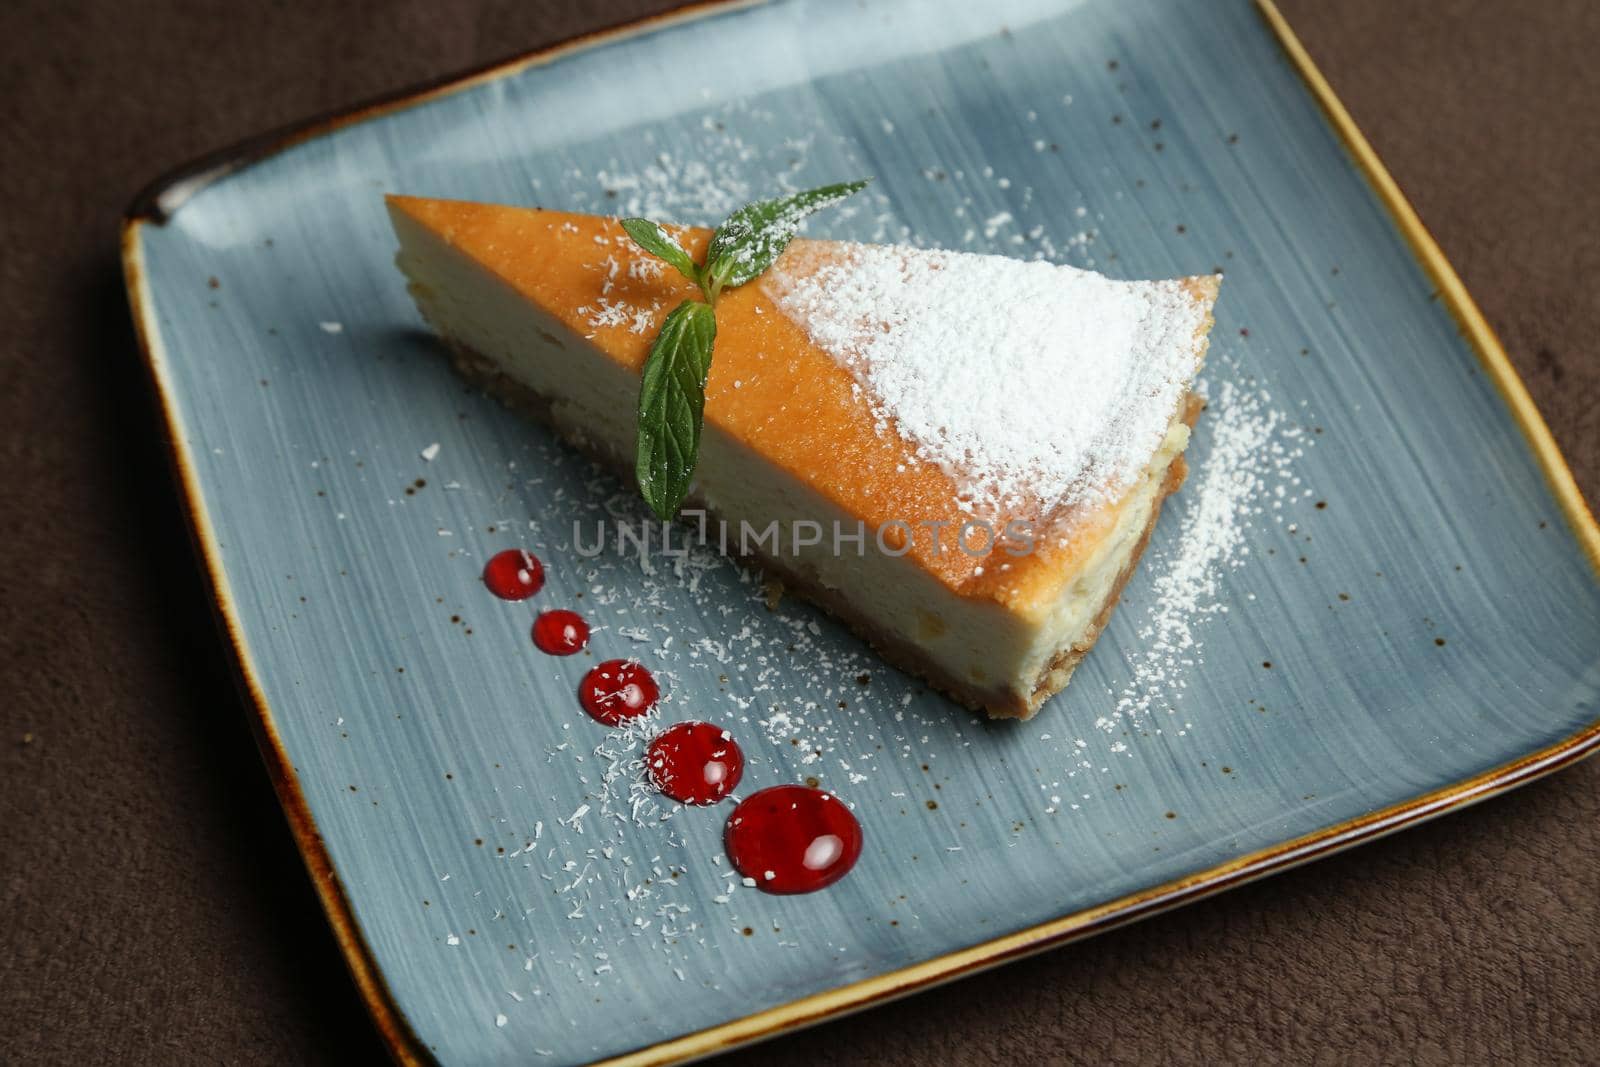 Delicious cheesecake with mint on the table nearby